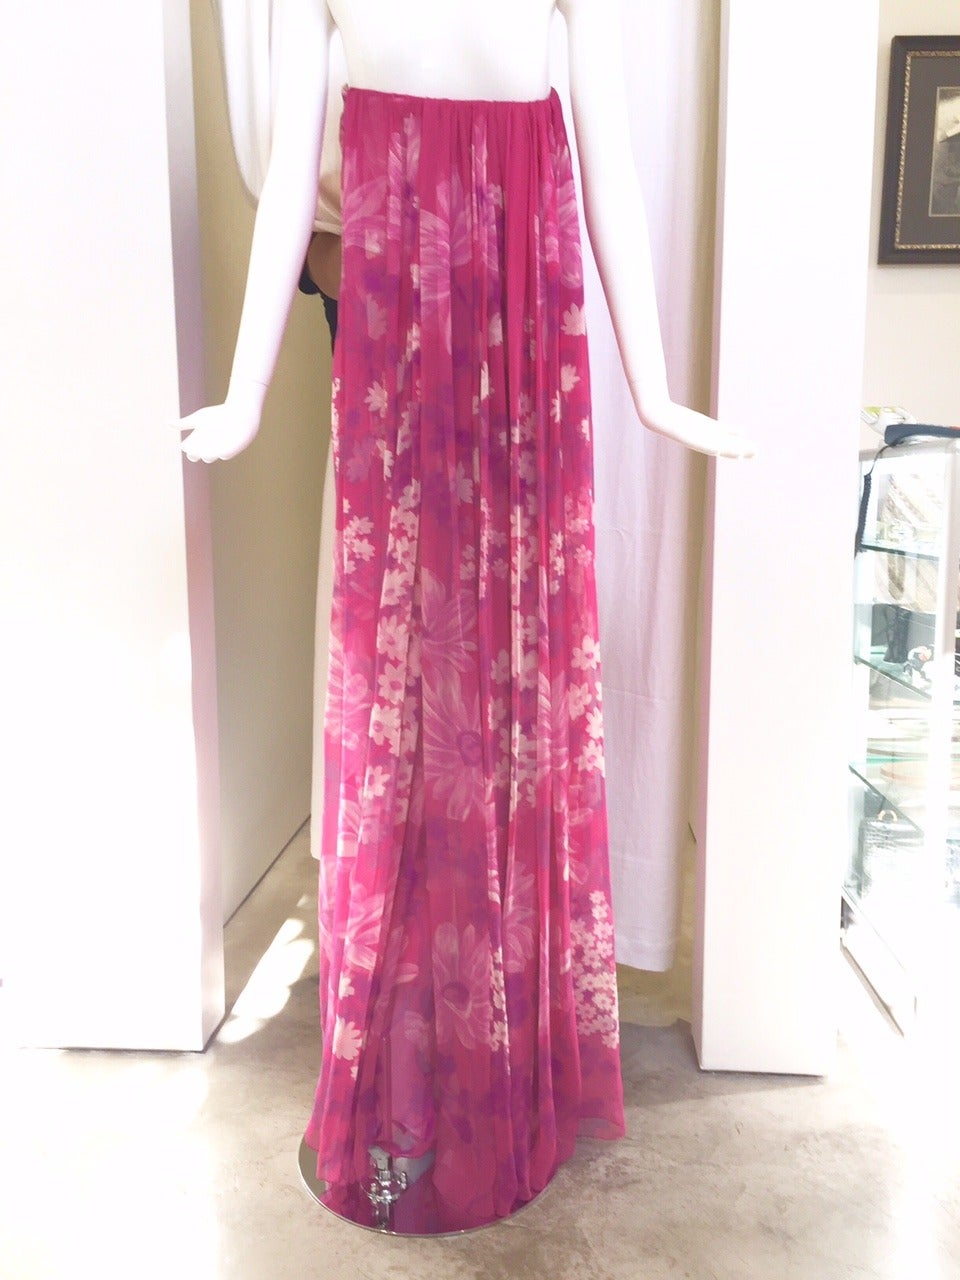 Late 60s early 70s Hanae Mori Pink floral silk strapless gown with train.
Built in corset
Fully lined in Silk.
SIZE : MEDIUM 
Bust :  36